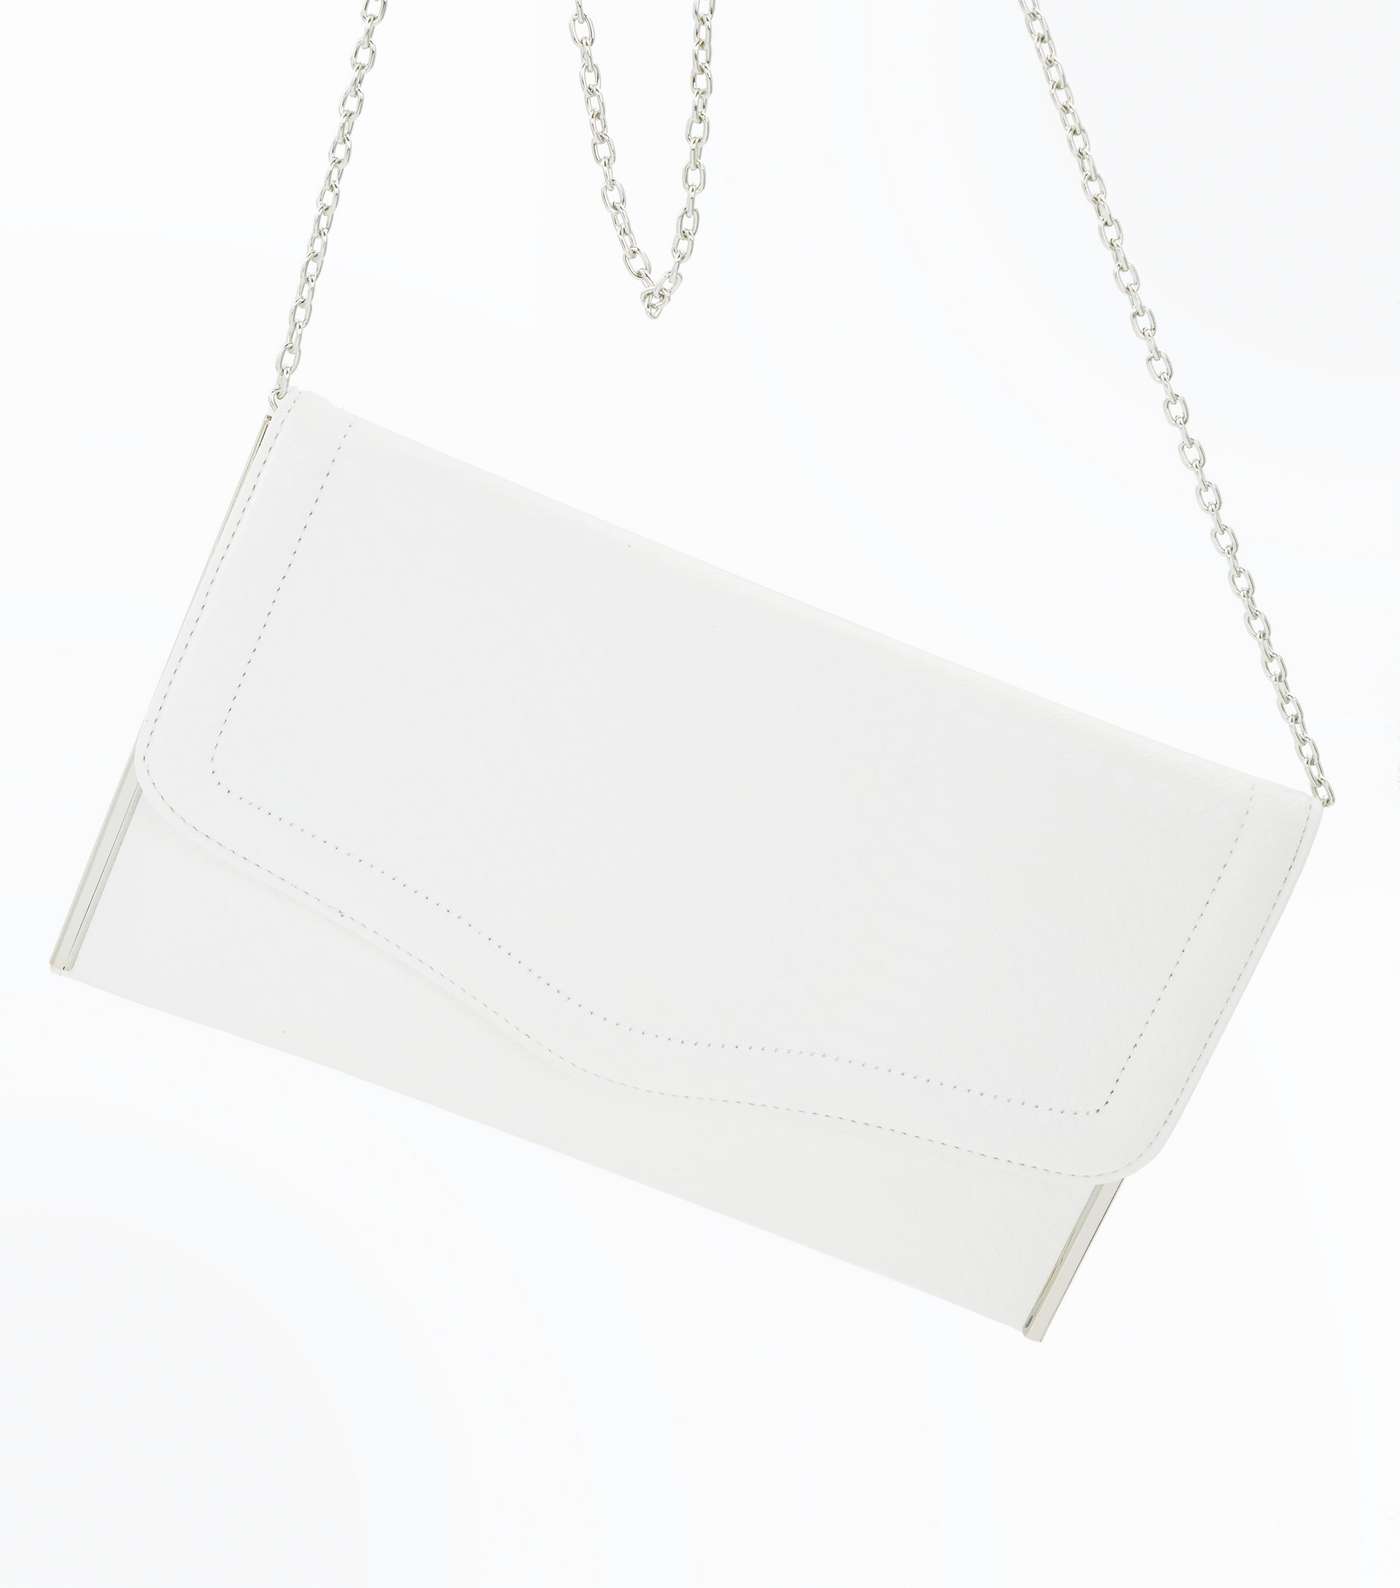 White Faux Snakeskin  Clutch Bag Image 3